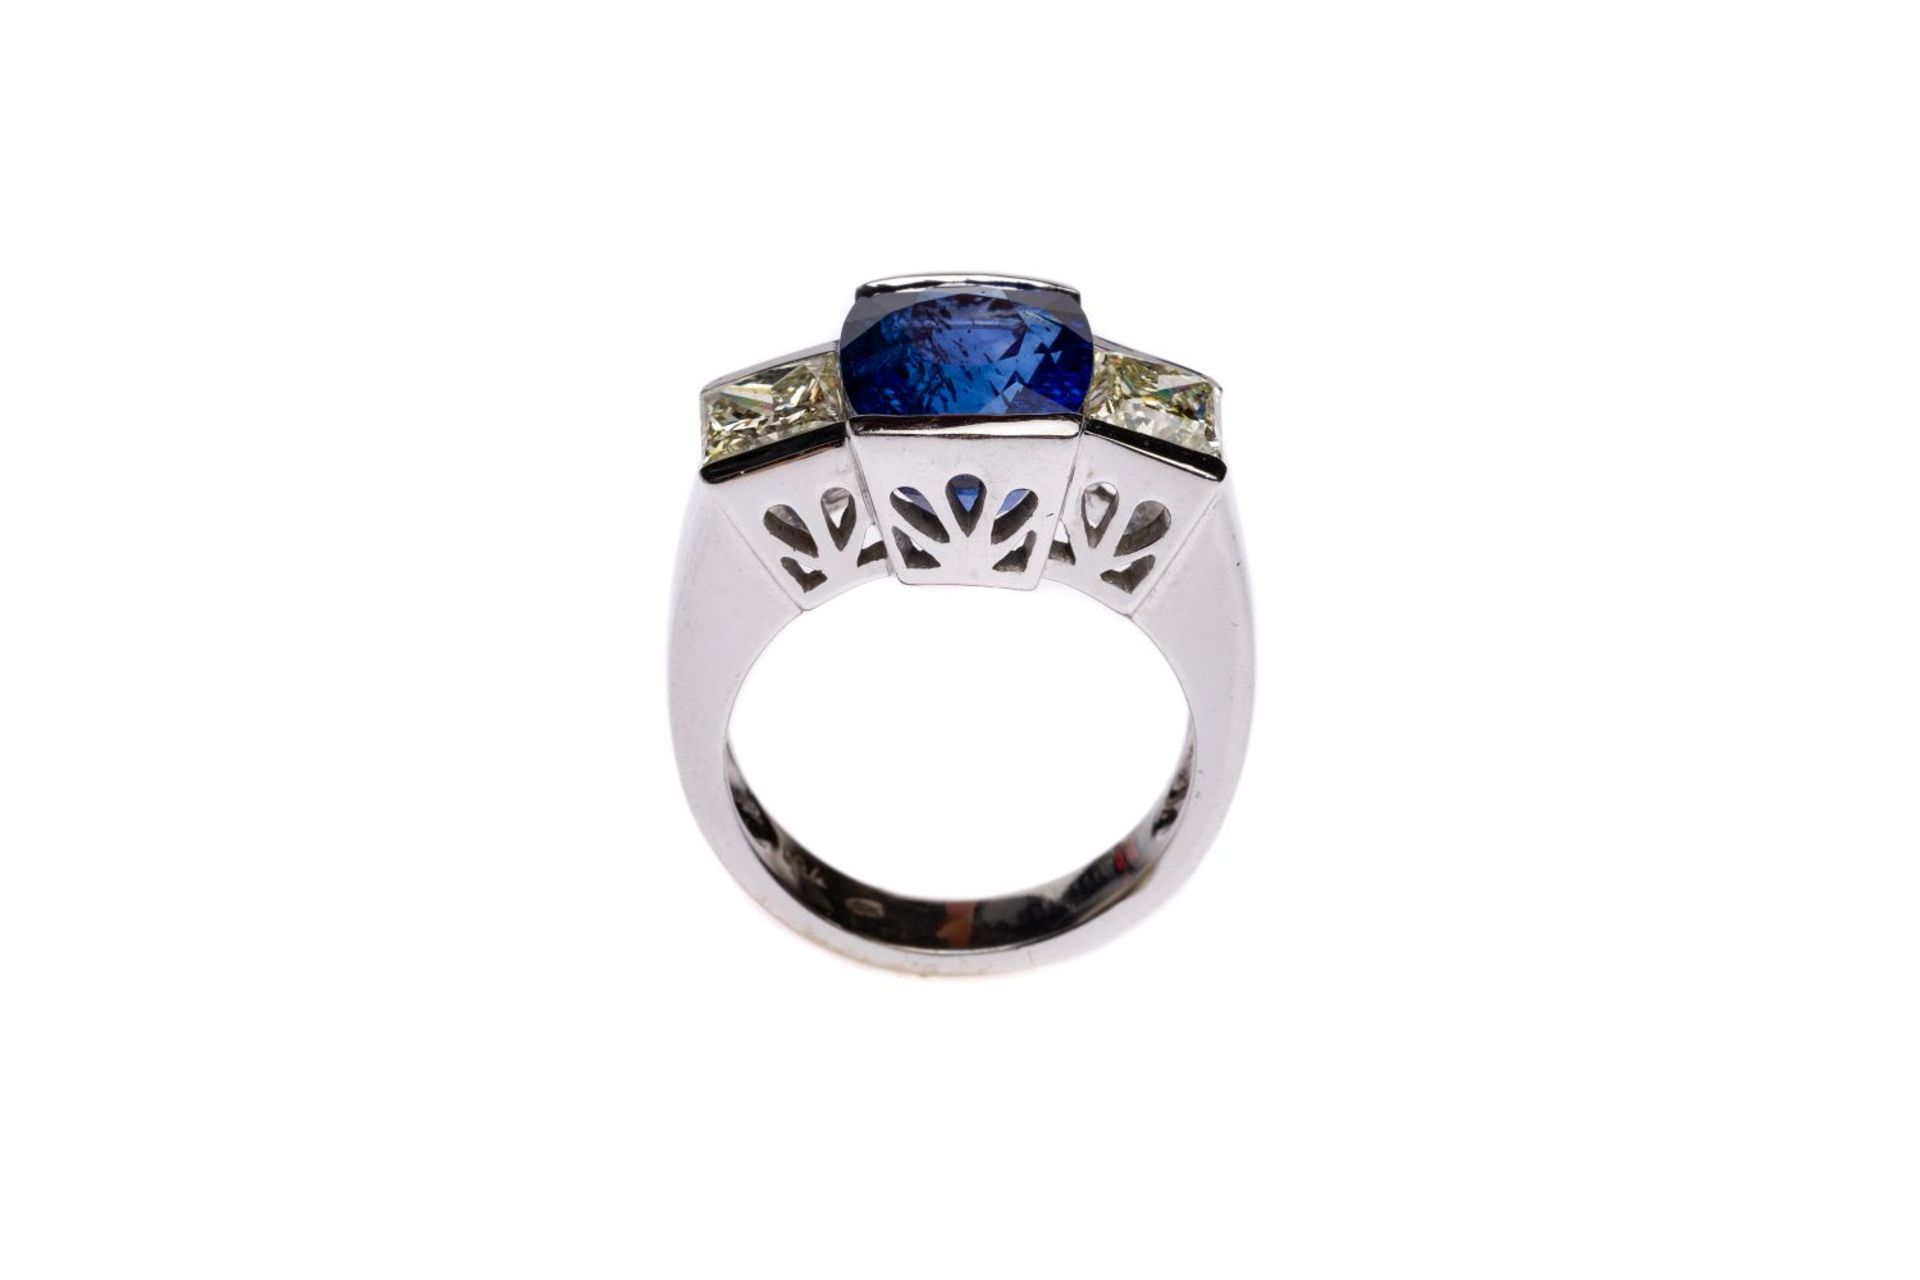 Diamond ring with sapphire18kt white gold ring with 2 princess-cut diamonds, total carat weight